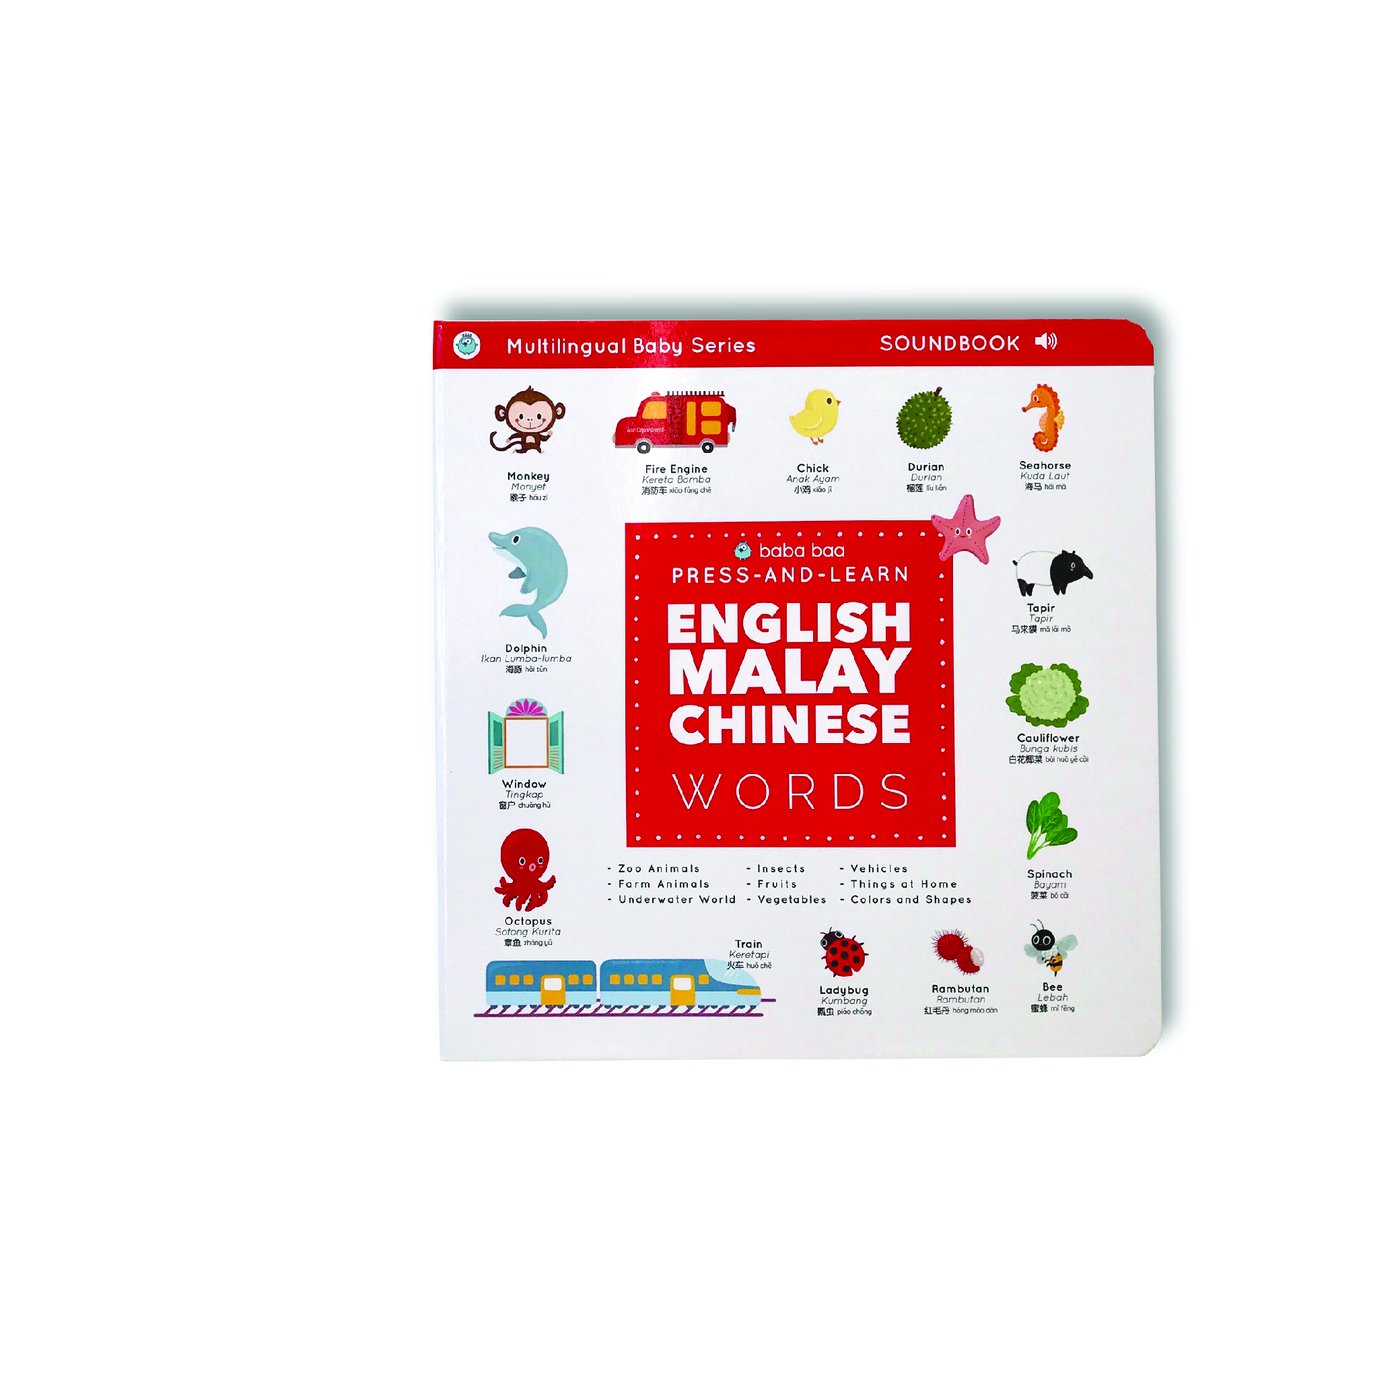 Press-and-Learn English Malay Chinese Words Book